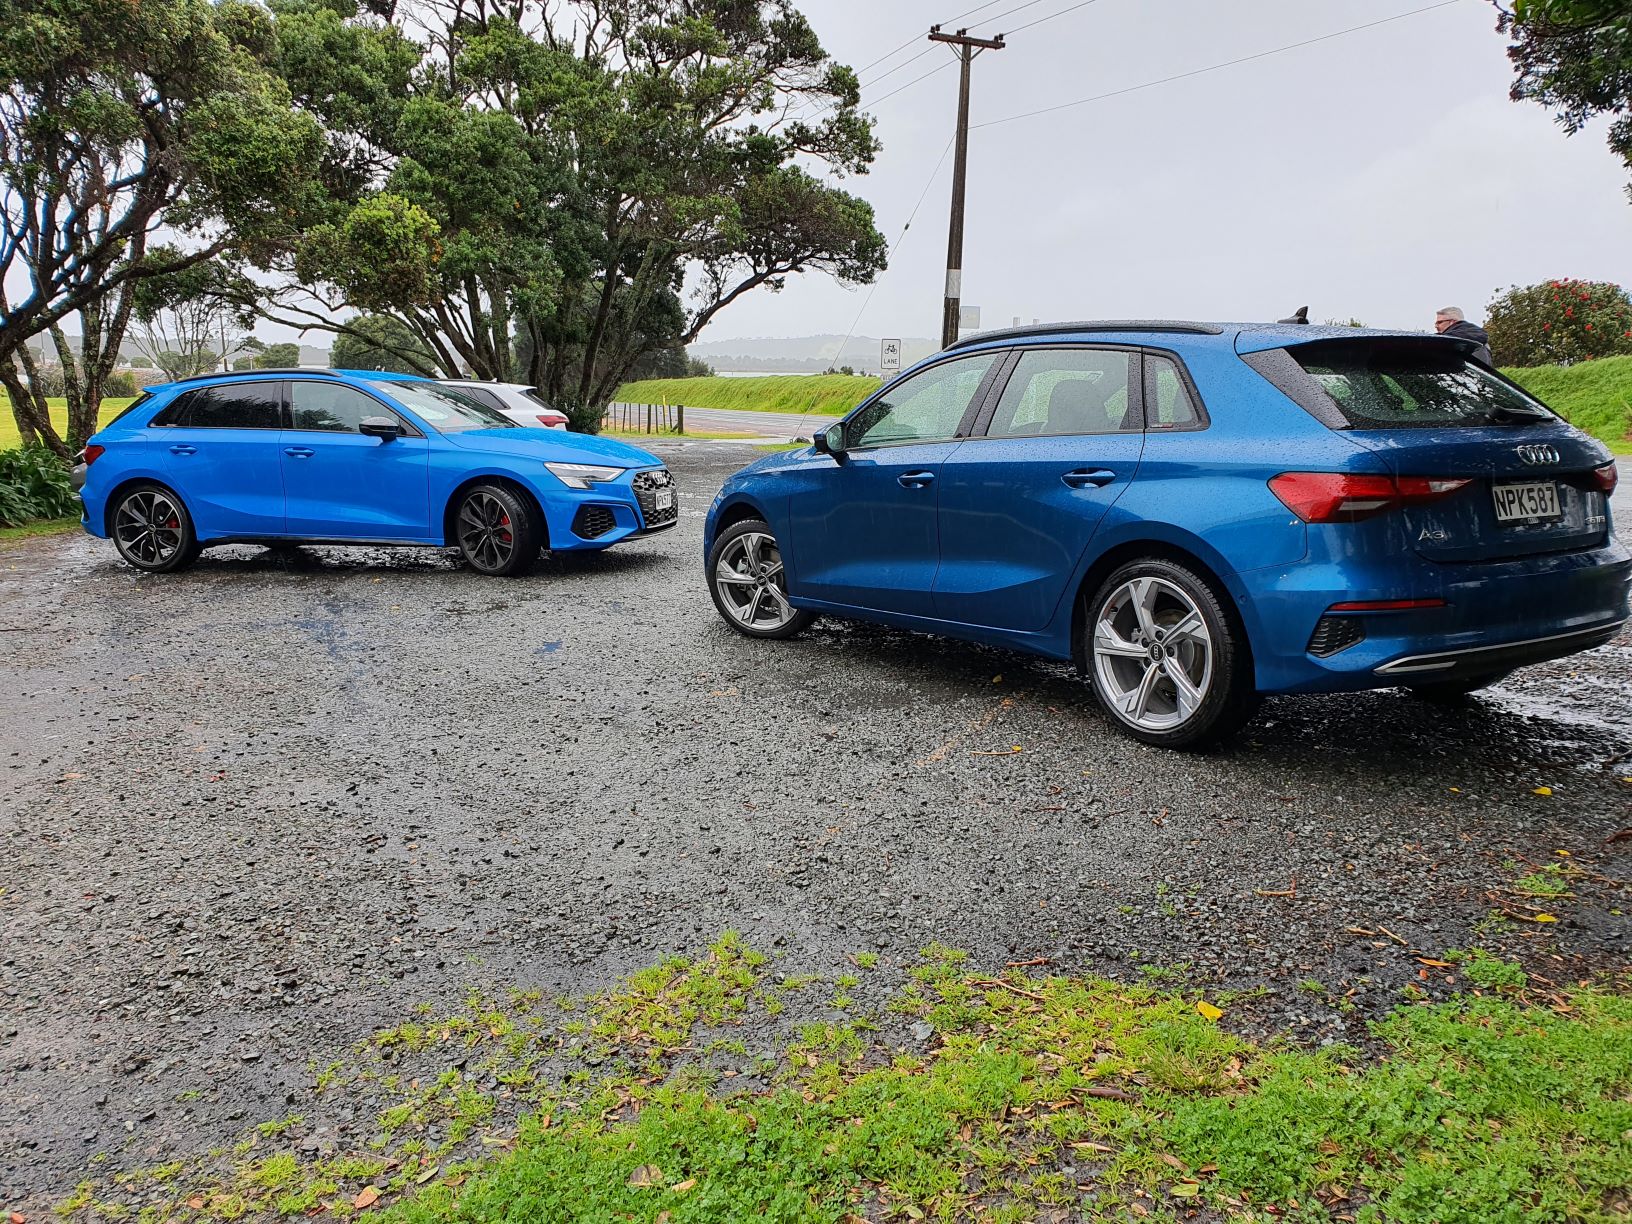 Audi's new A3 and S3 models